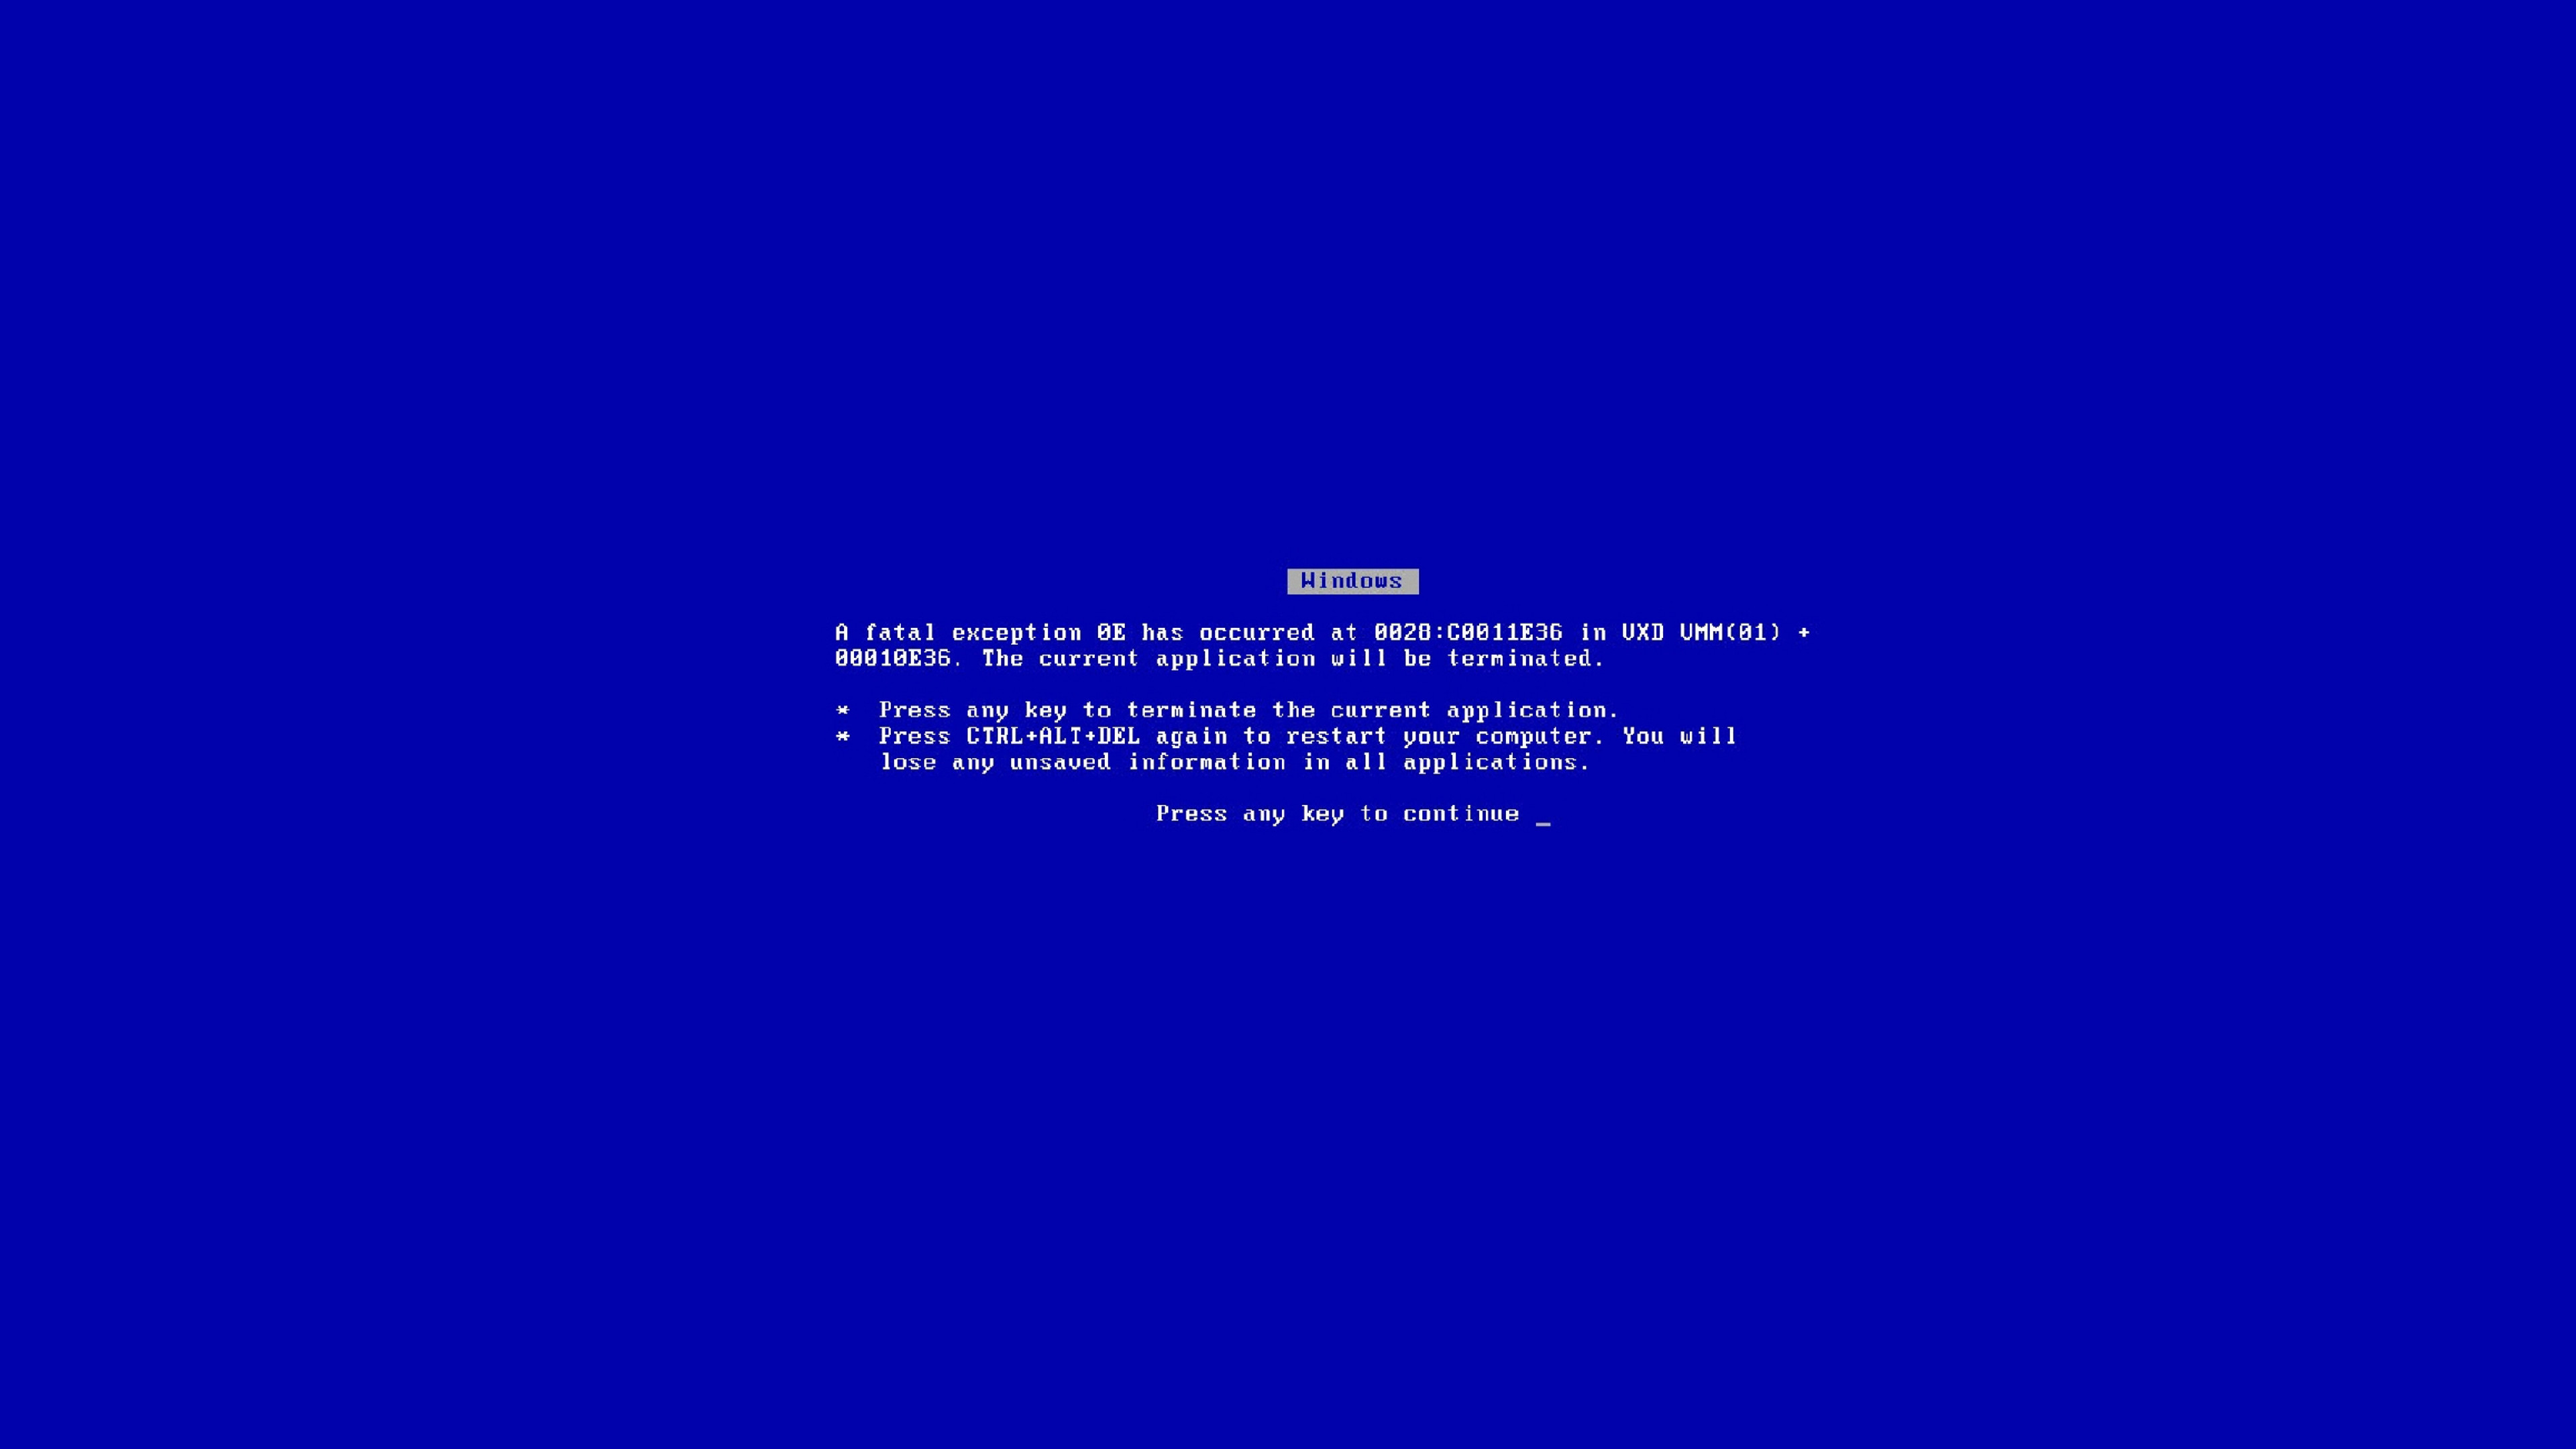 Blue Screen of Death Wallpaper (67+ pictures)